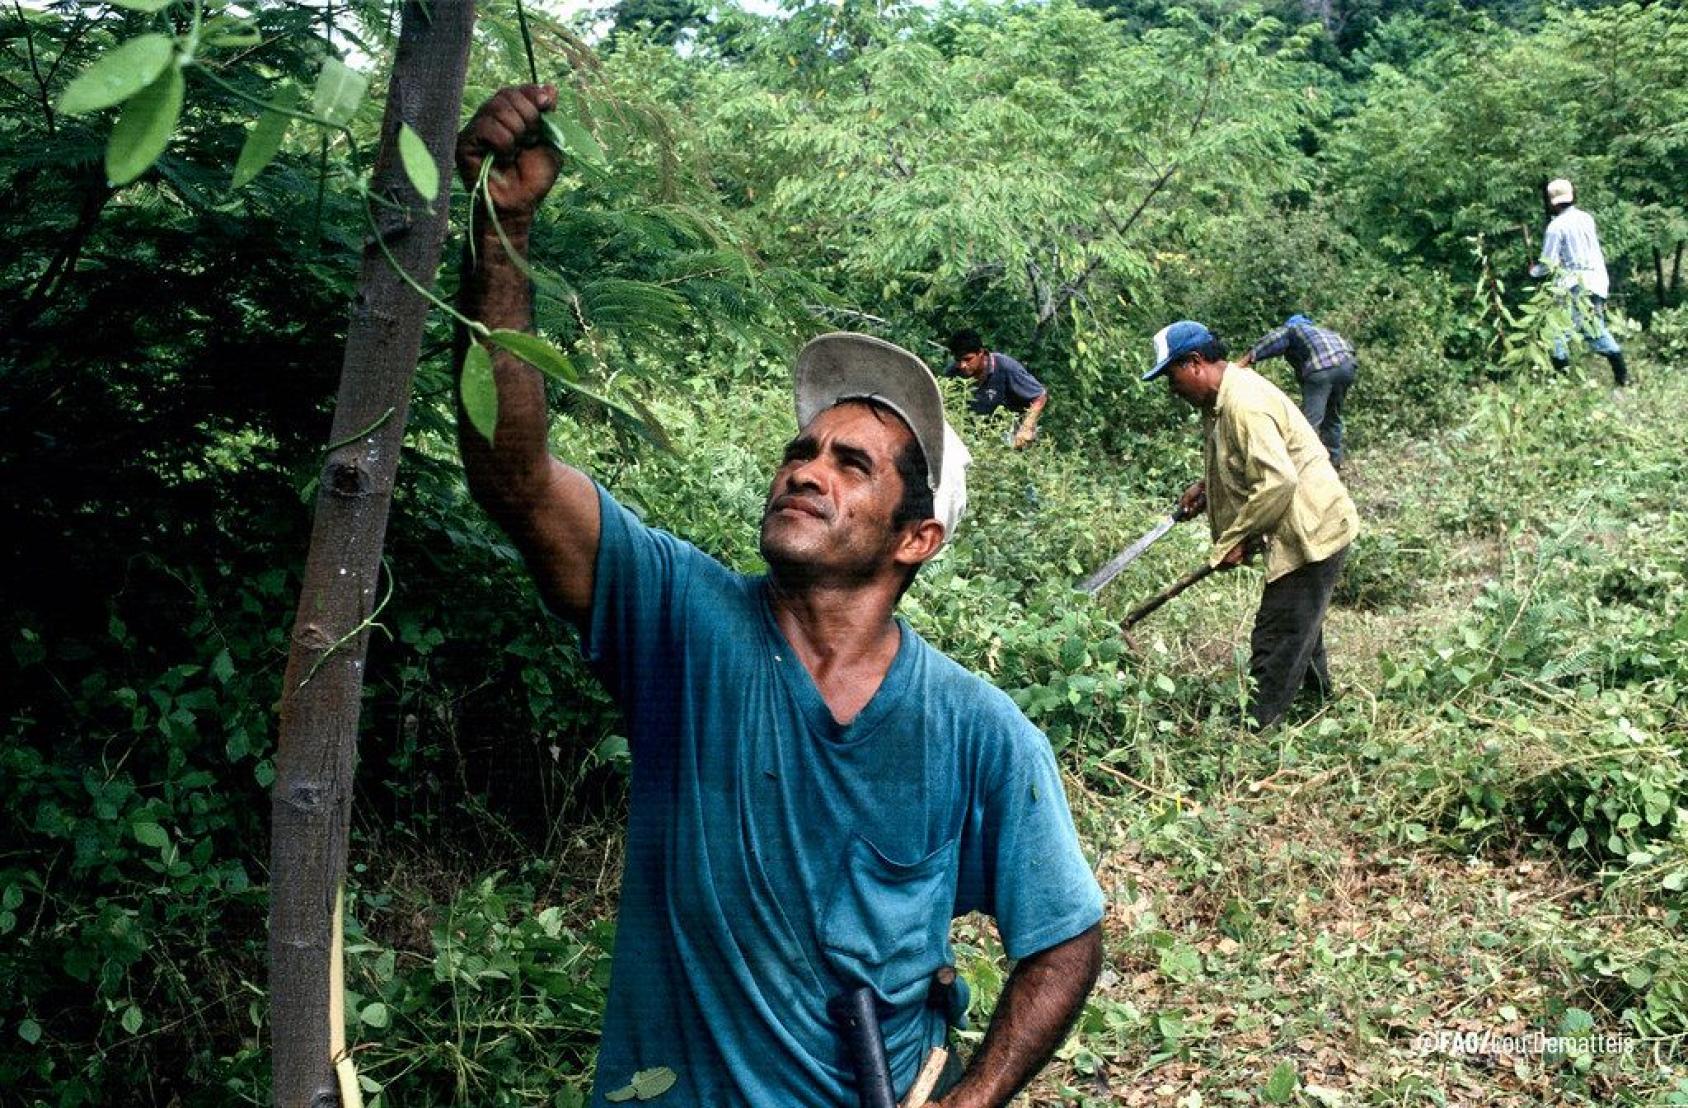 Several men working in a field. 